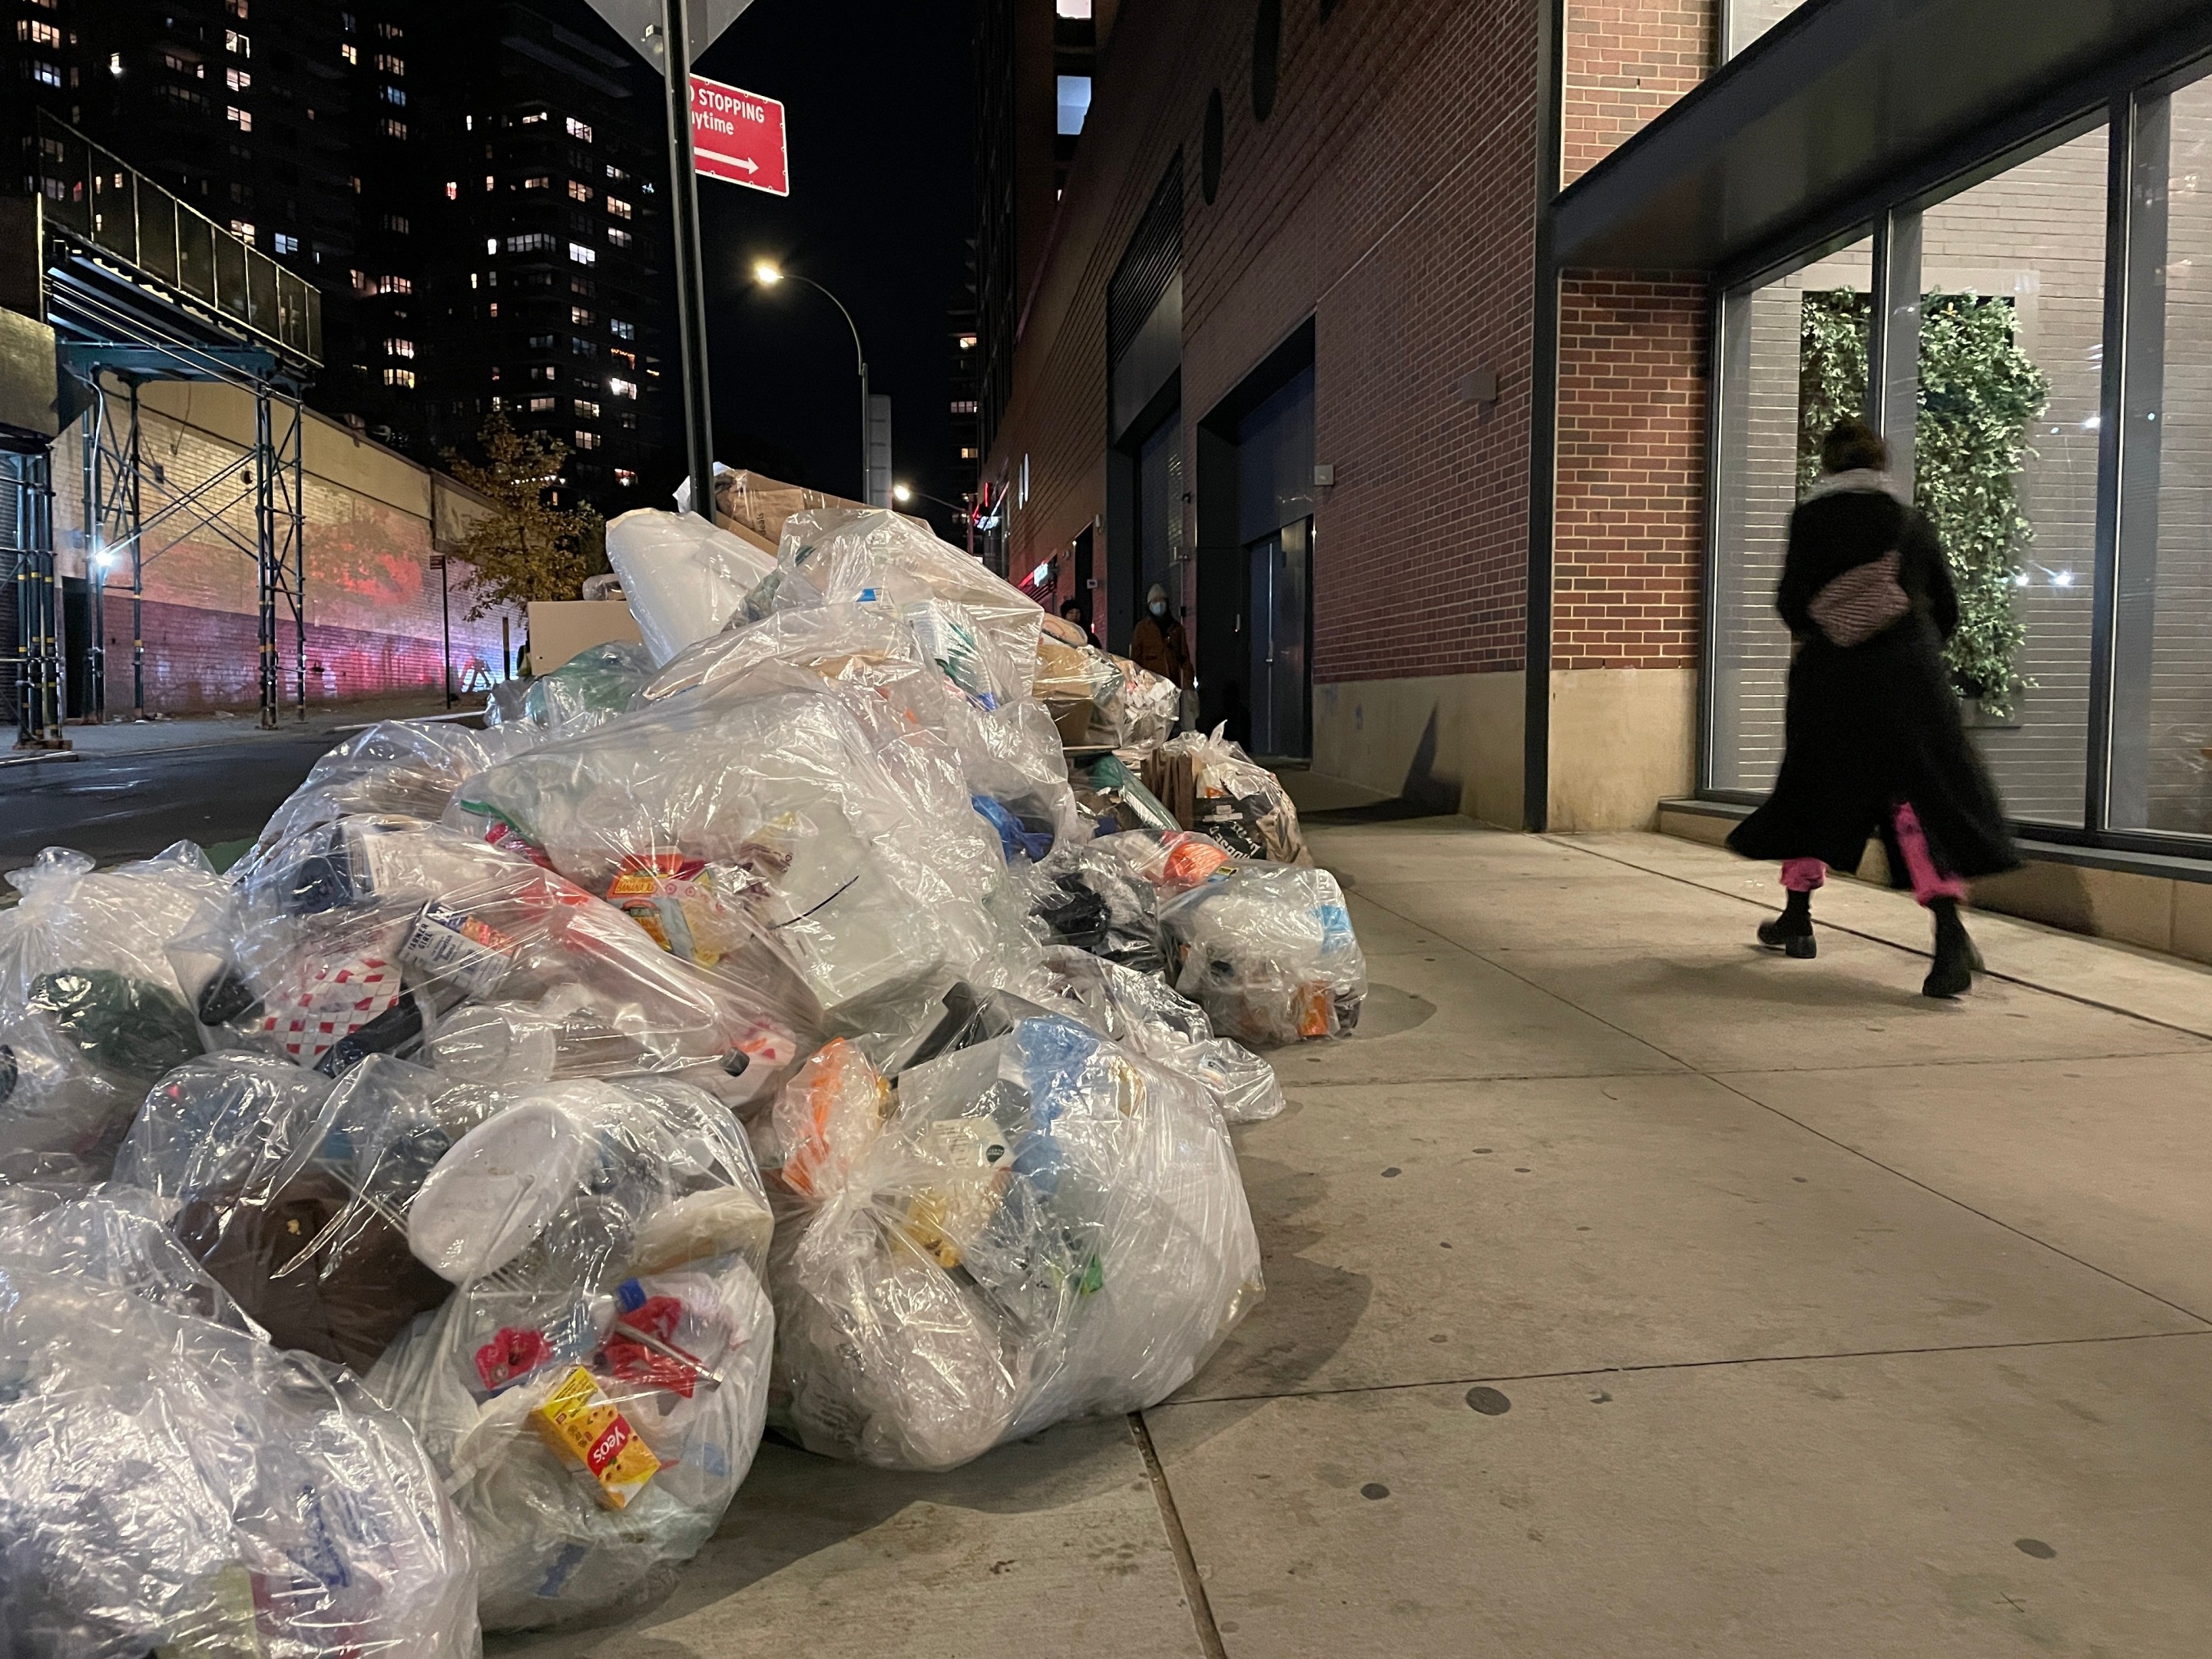 A giant pile of trash on the sidewalk.